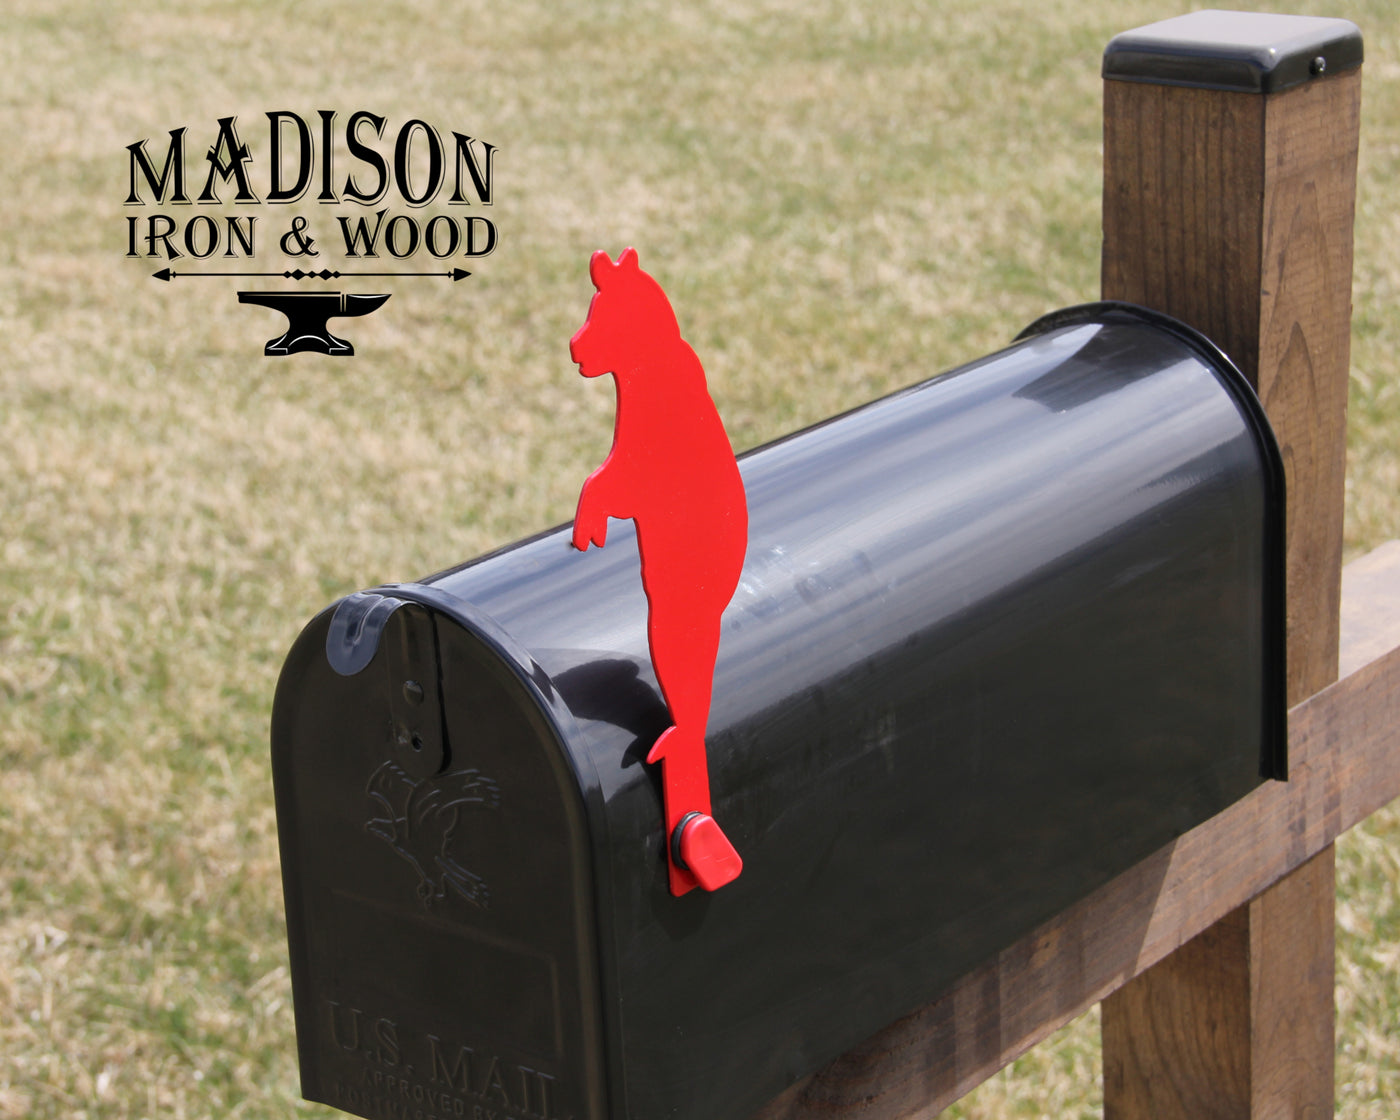 Bear Mailbox Flag - Madison Iron and Wood - Mailbox Post Decor - metal outdoor decor - Steel deocrations - american made products - veteran owned business products - fencing decorations - fencing supplies - custom wall decorations - personalized wall signs - steel - decorative post caps - steel post caps - metal post caps - brackets - structural brackets - home improvement - easter - easter decorations - easter gift - easter yard decor